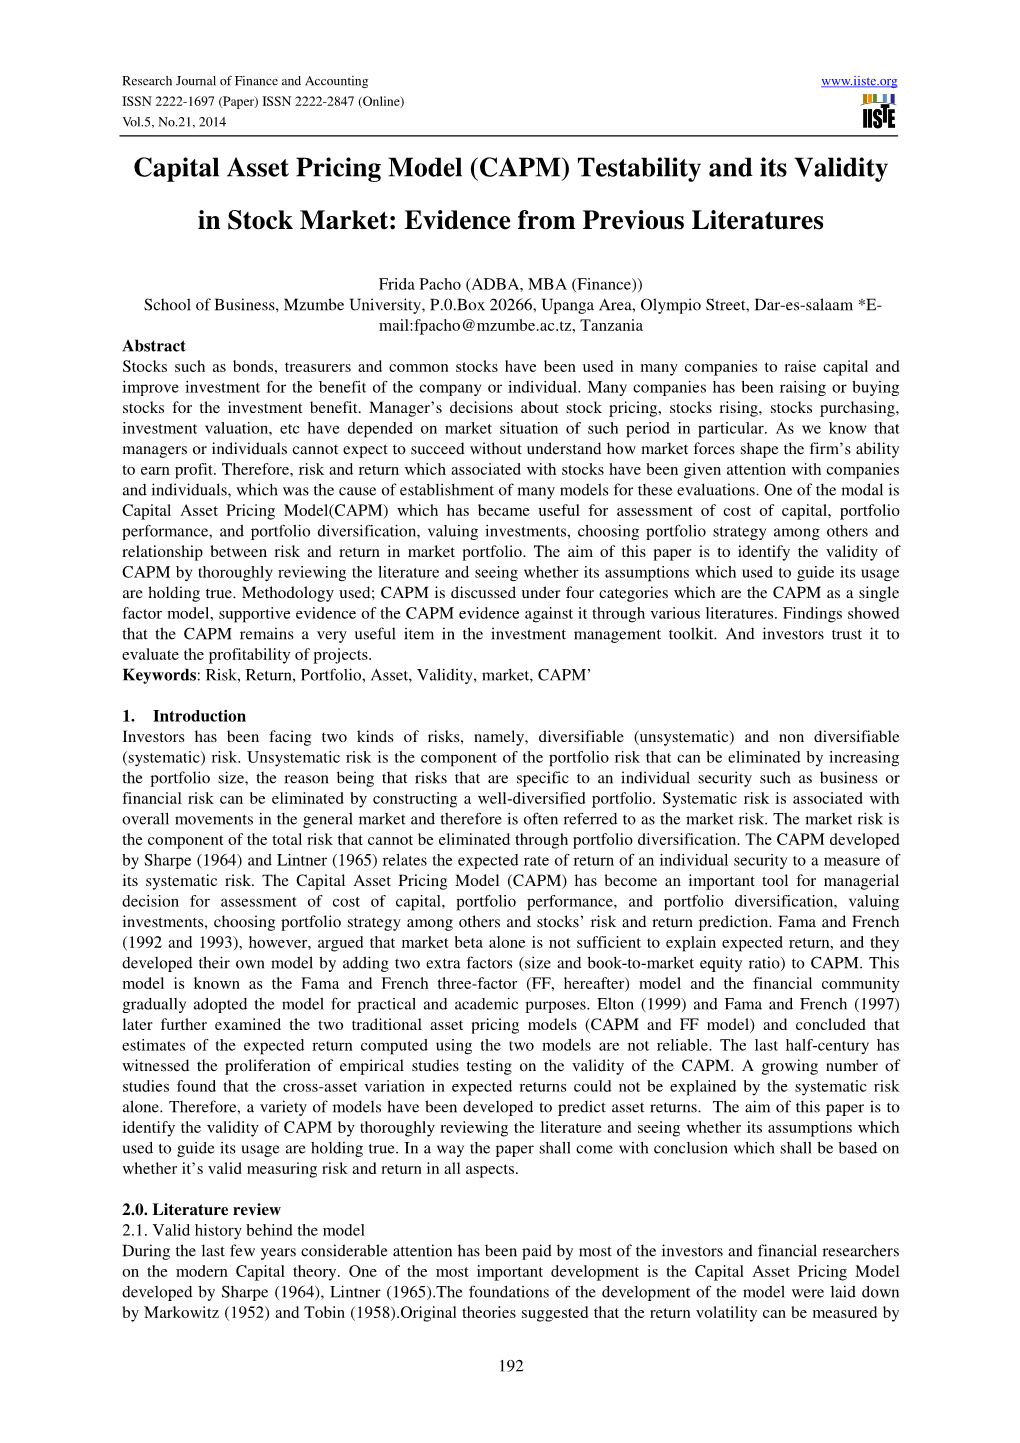 Capital Asset Pricing Model (CAPM) Testability and Its Validity in Stock Market: Evidence from Previous Literatures